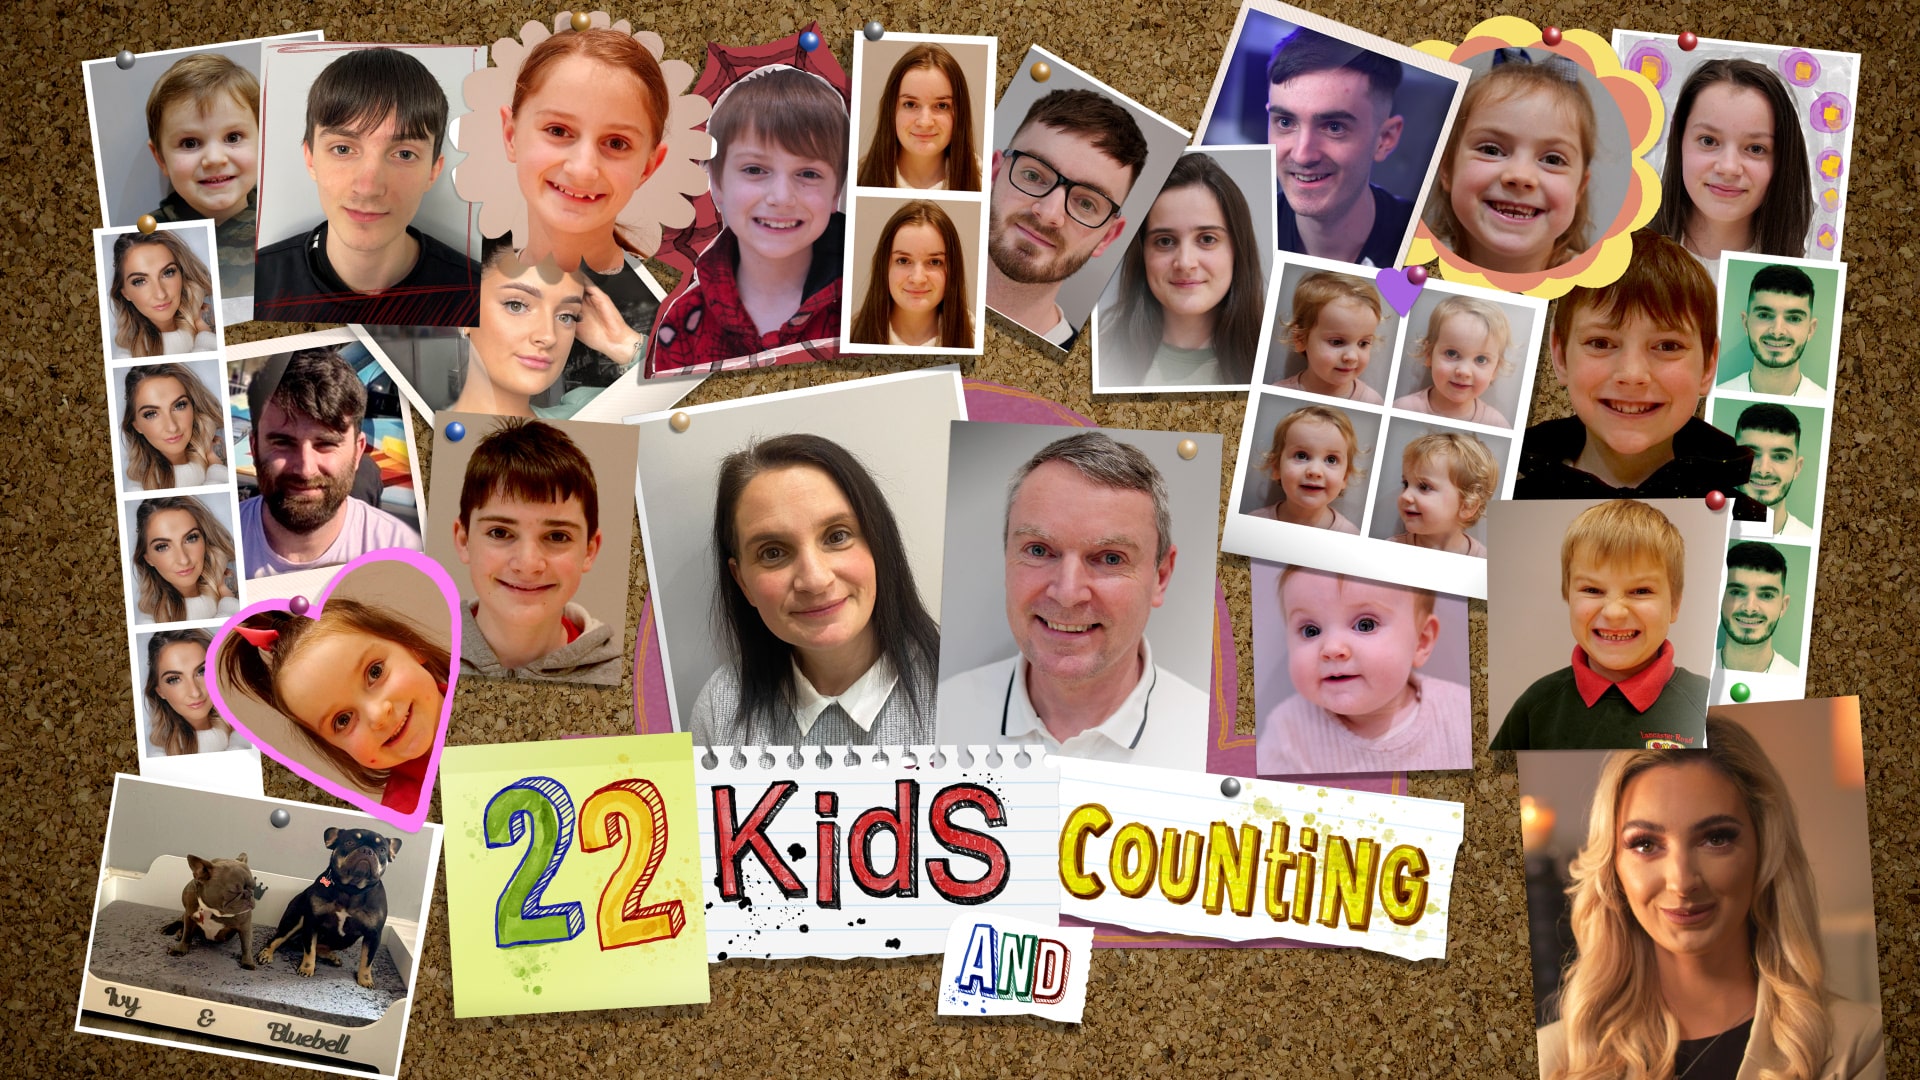 Britains biggest family return to Channel 5 for a new series of 22 kids and counting